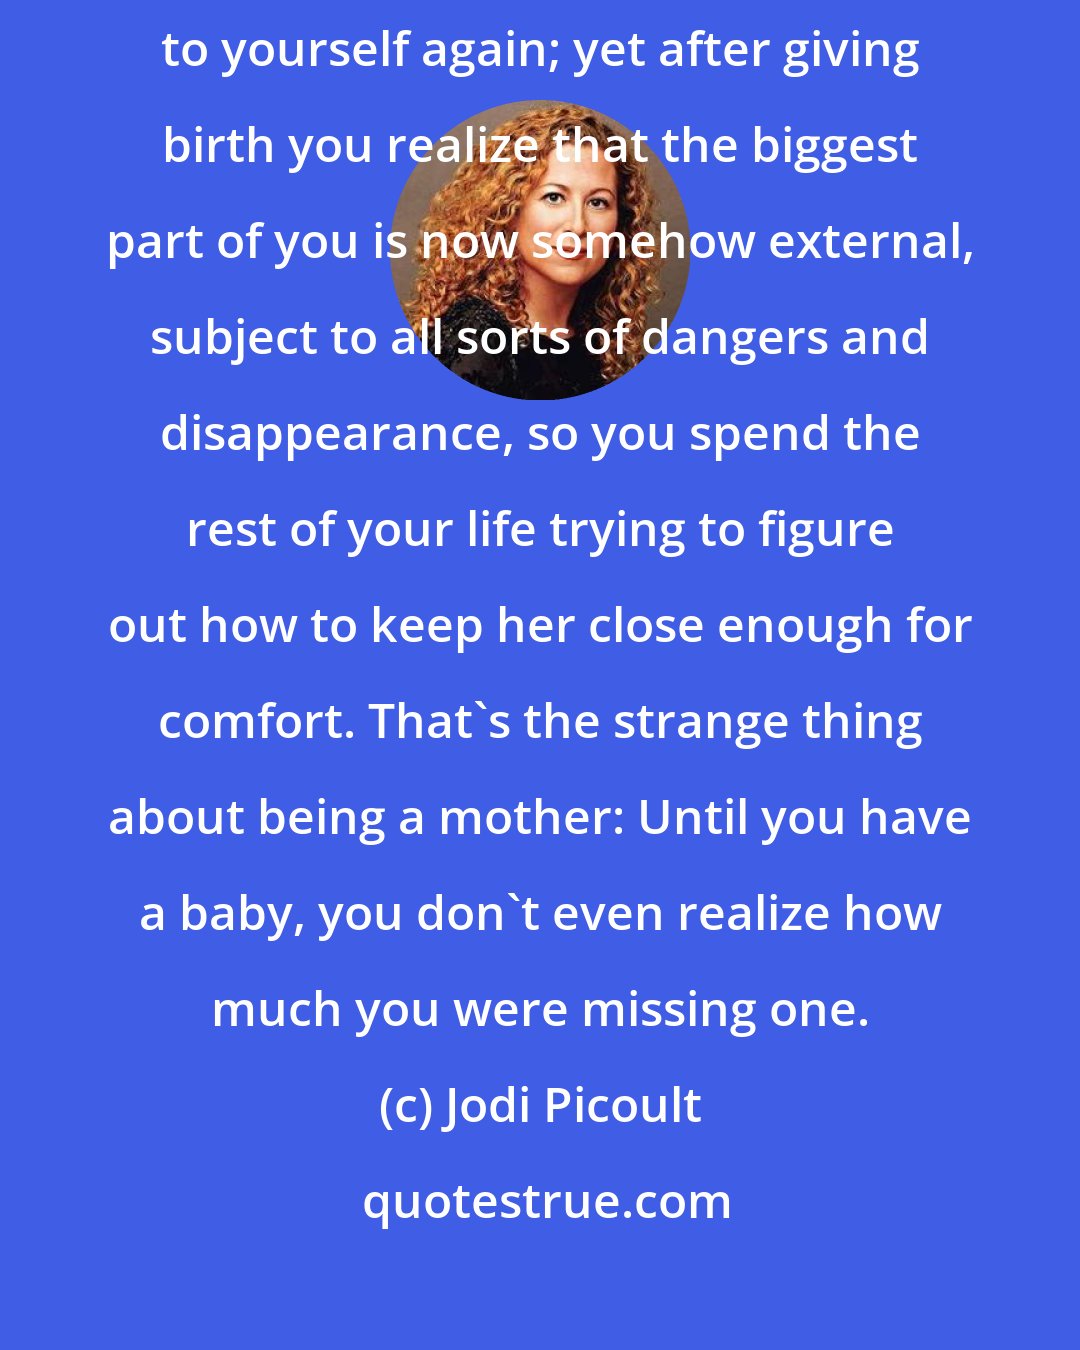 Jodi Picoult: When you're pregnant, you can think of nothing but having your own body to yourself again; yet after giving birth you realize that the biggest part of you is now somehow external, subject to all sorts of dangers and disappearance, so you spend the rest of your life trying to figure out how to keep her close enough for comfort. That's the strange thing about being a mother: Until you have a baby, you don't even realize how much you were missing one.